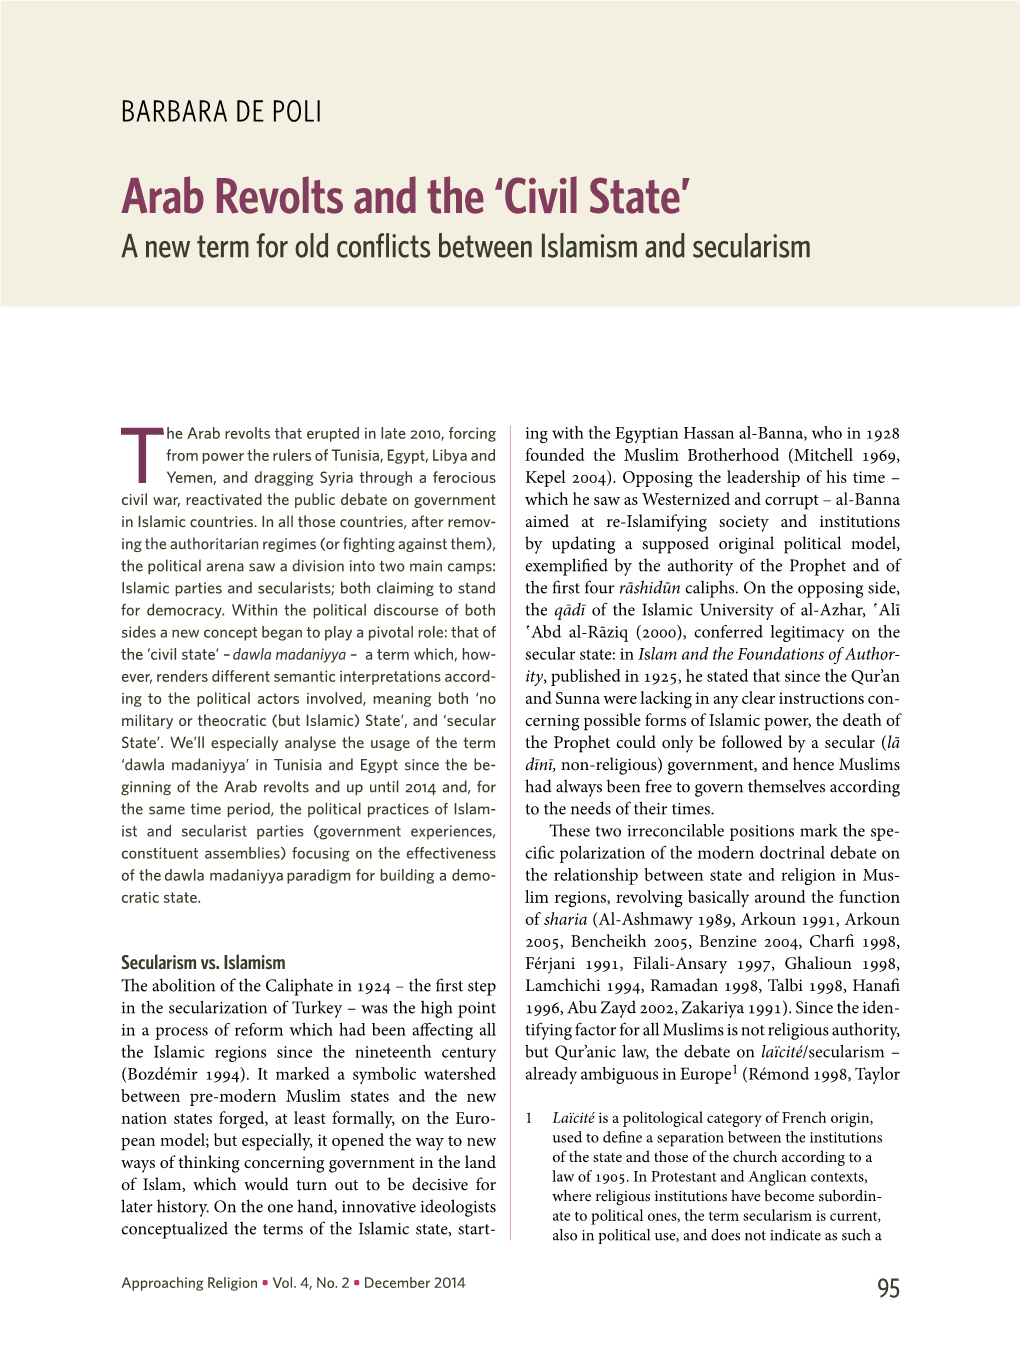 Civil State’ a New Term for Old Conflicts Between Islamism and Secularism